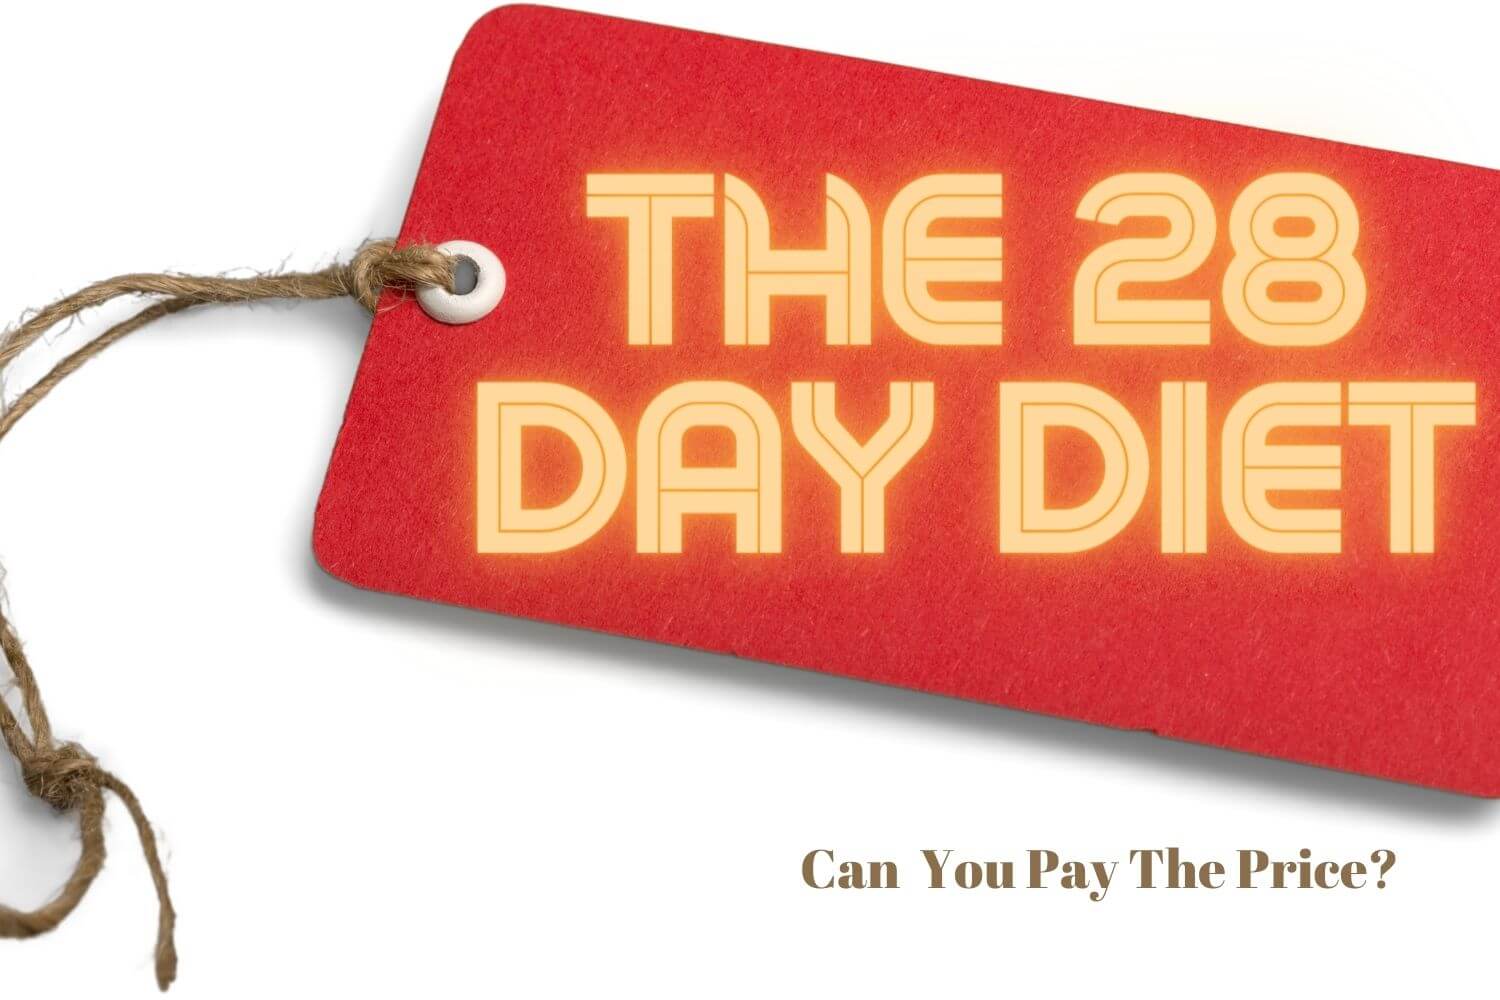 Change Your Life in 28 Days: Can You Pay the Price?